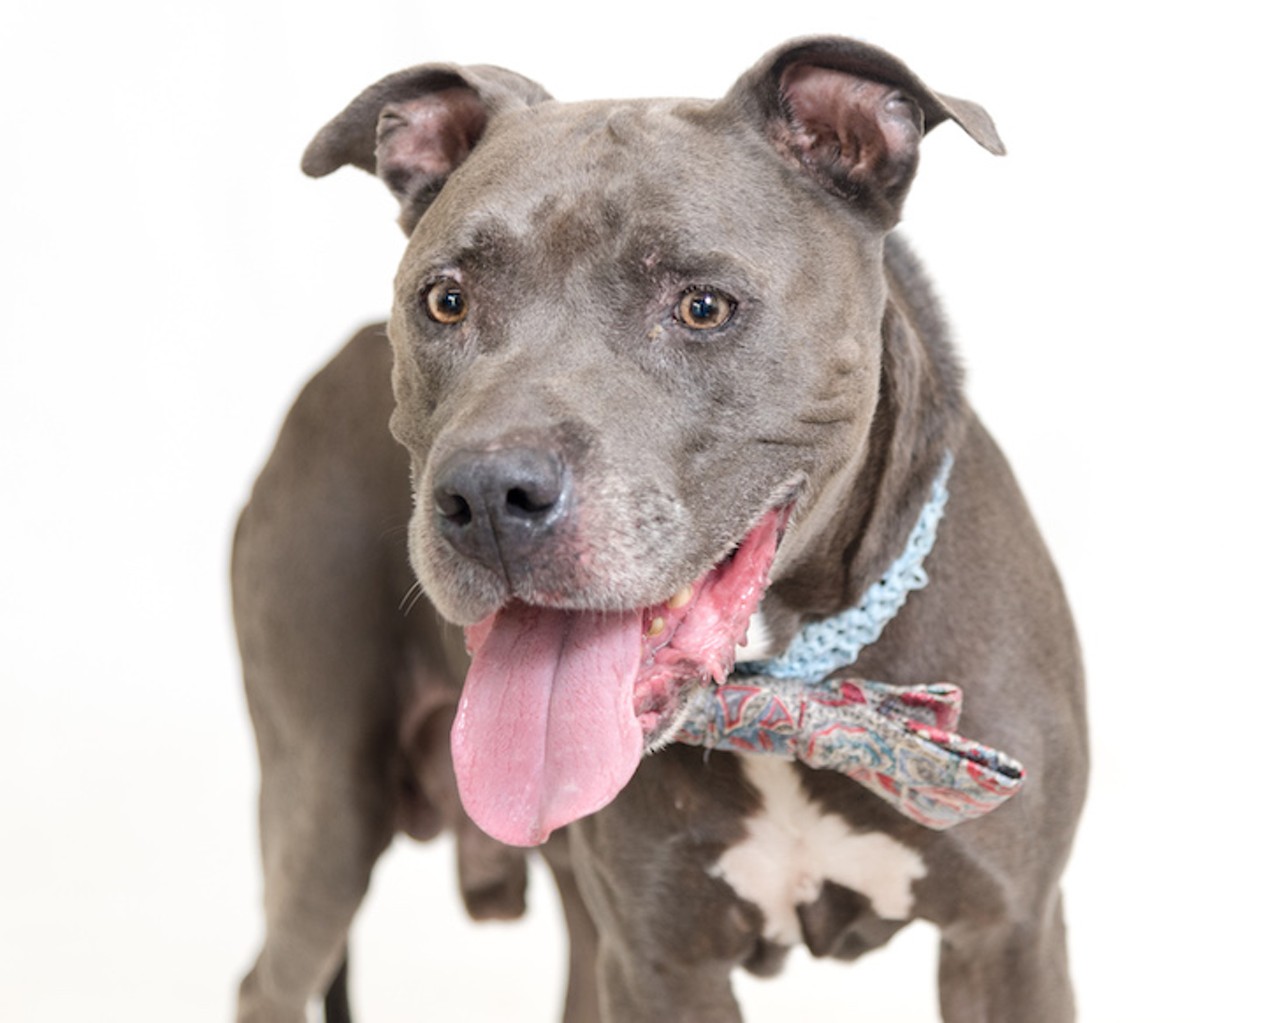 13 adoptable dogs available right now at Orange County Animal Services